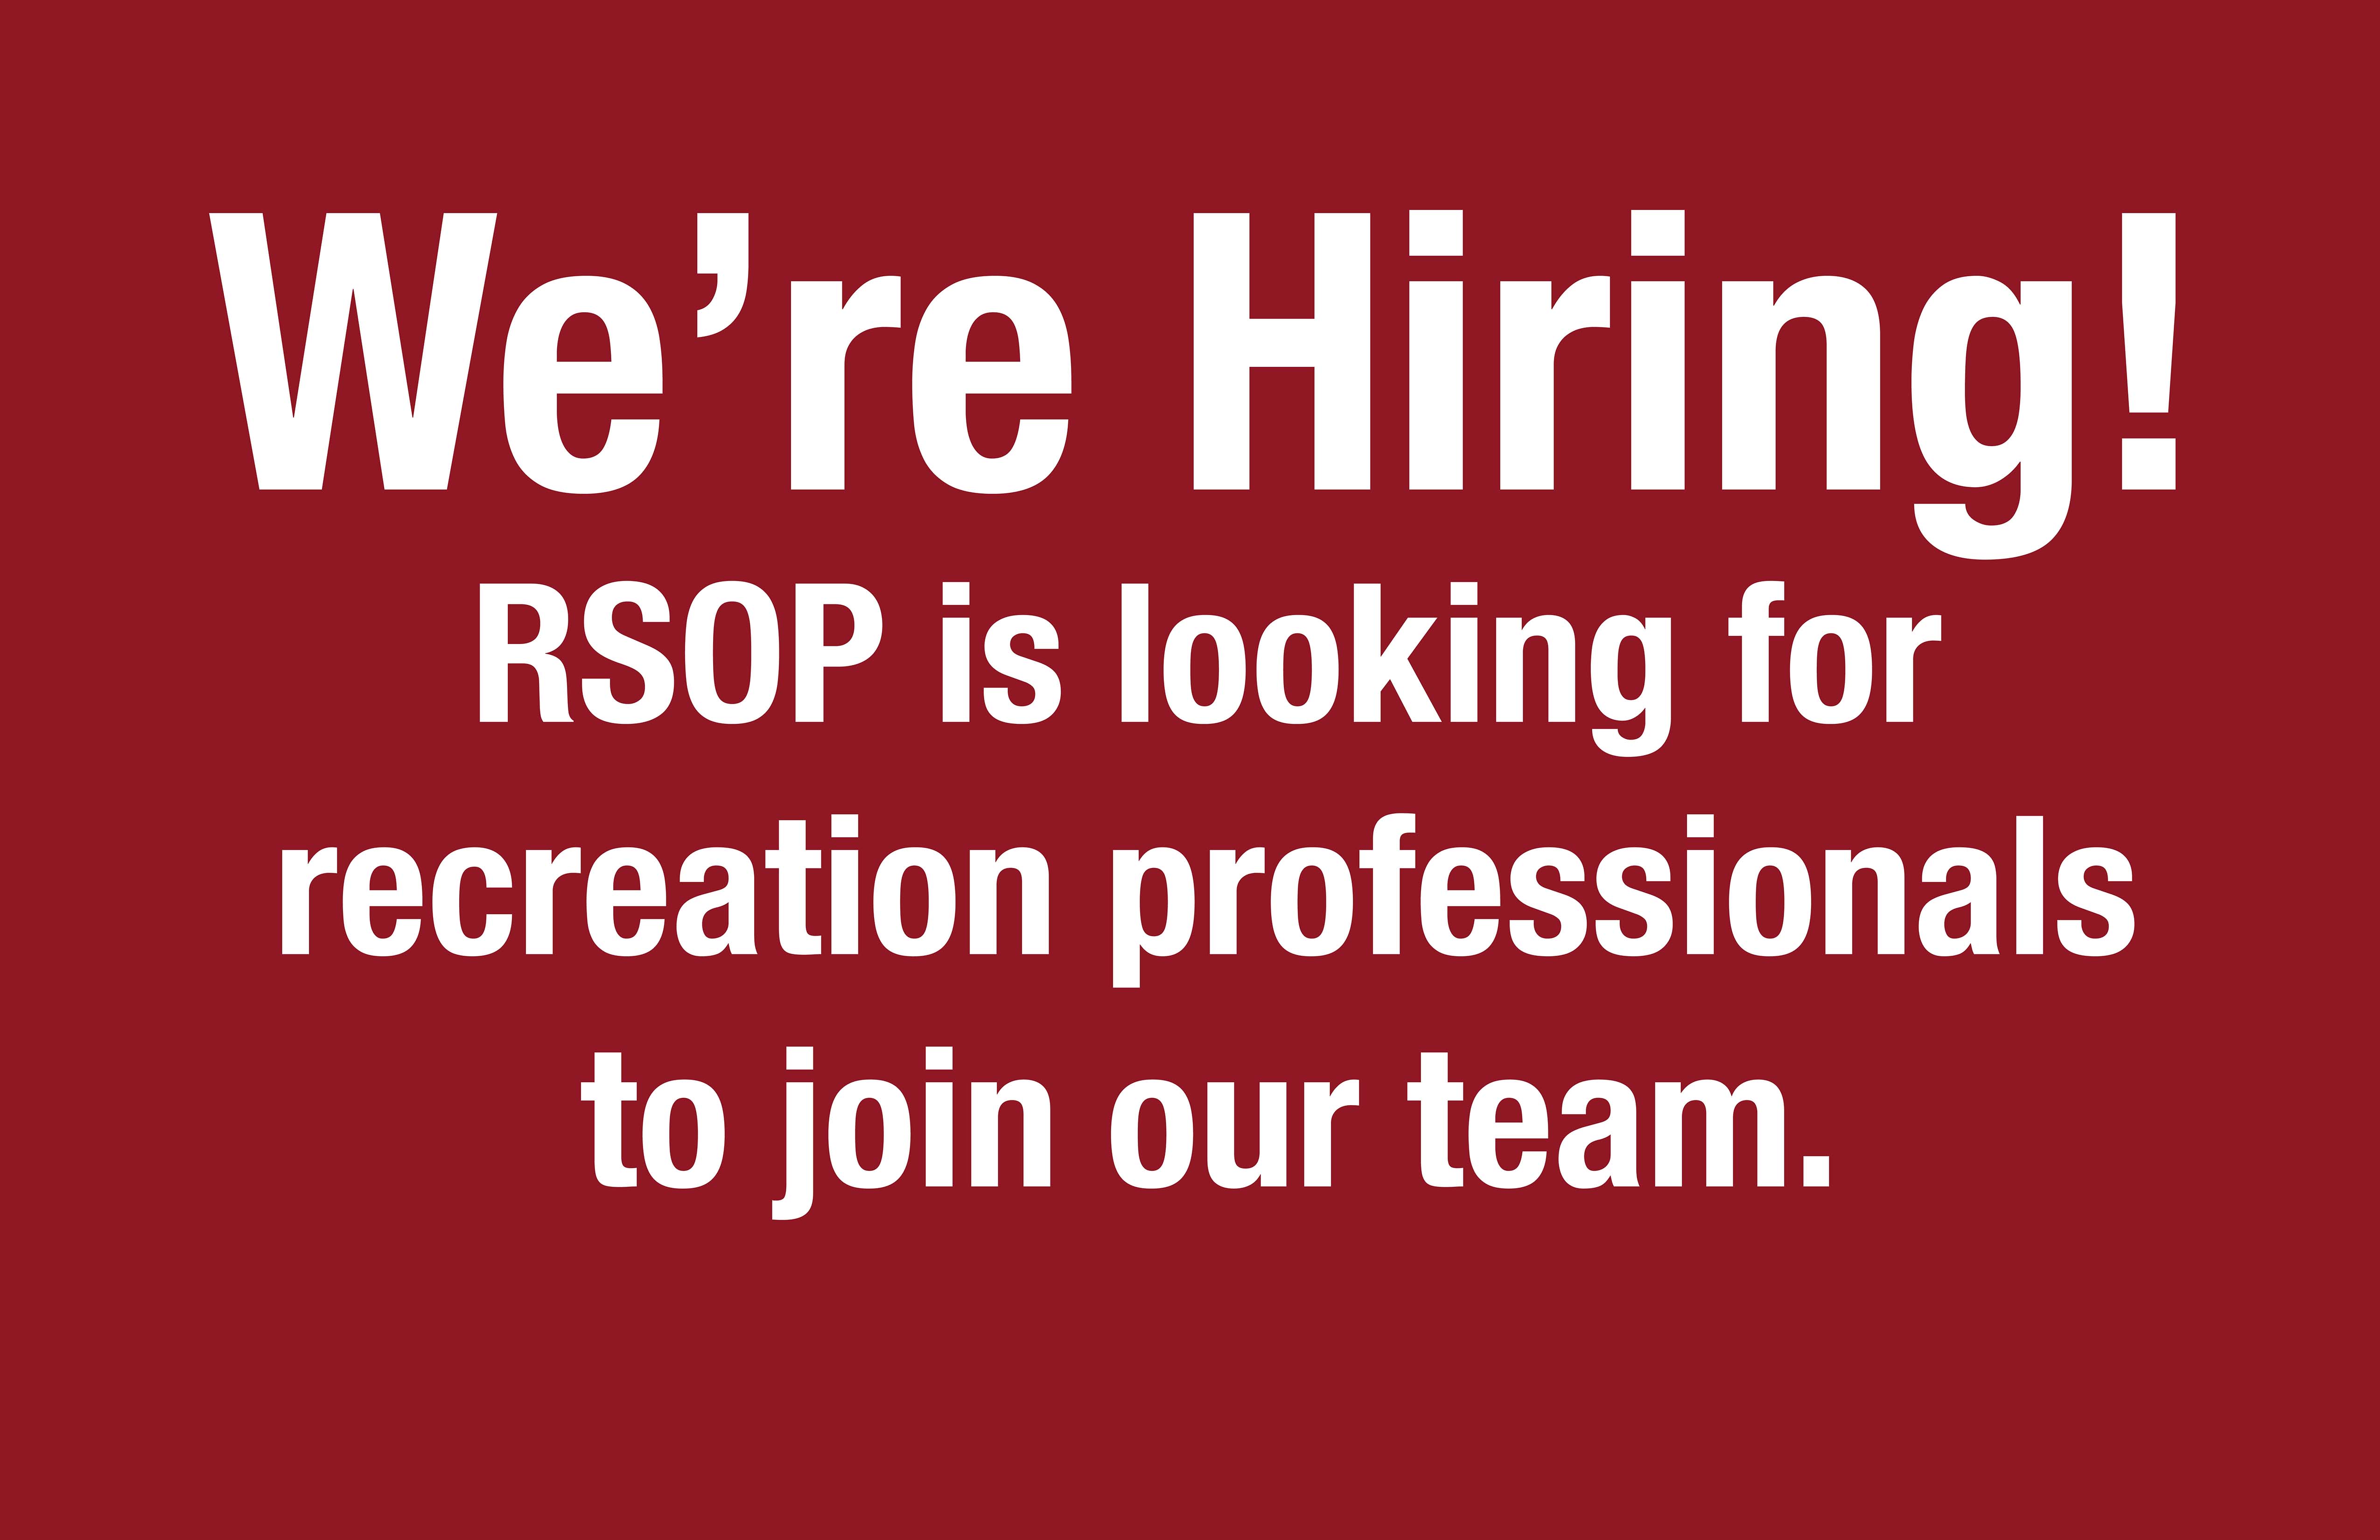 We're Hiring! RSOP is looking for recreation professionals to join our team.